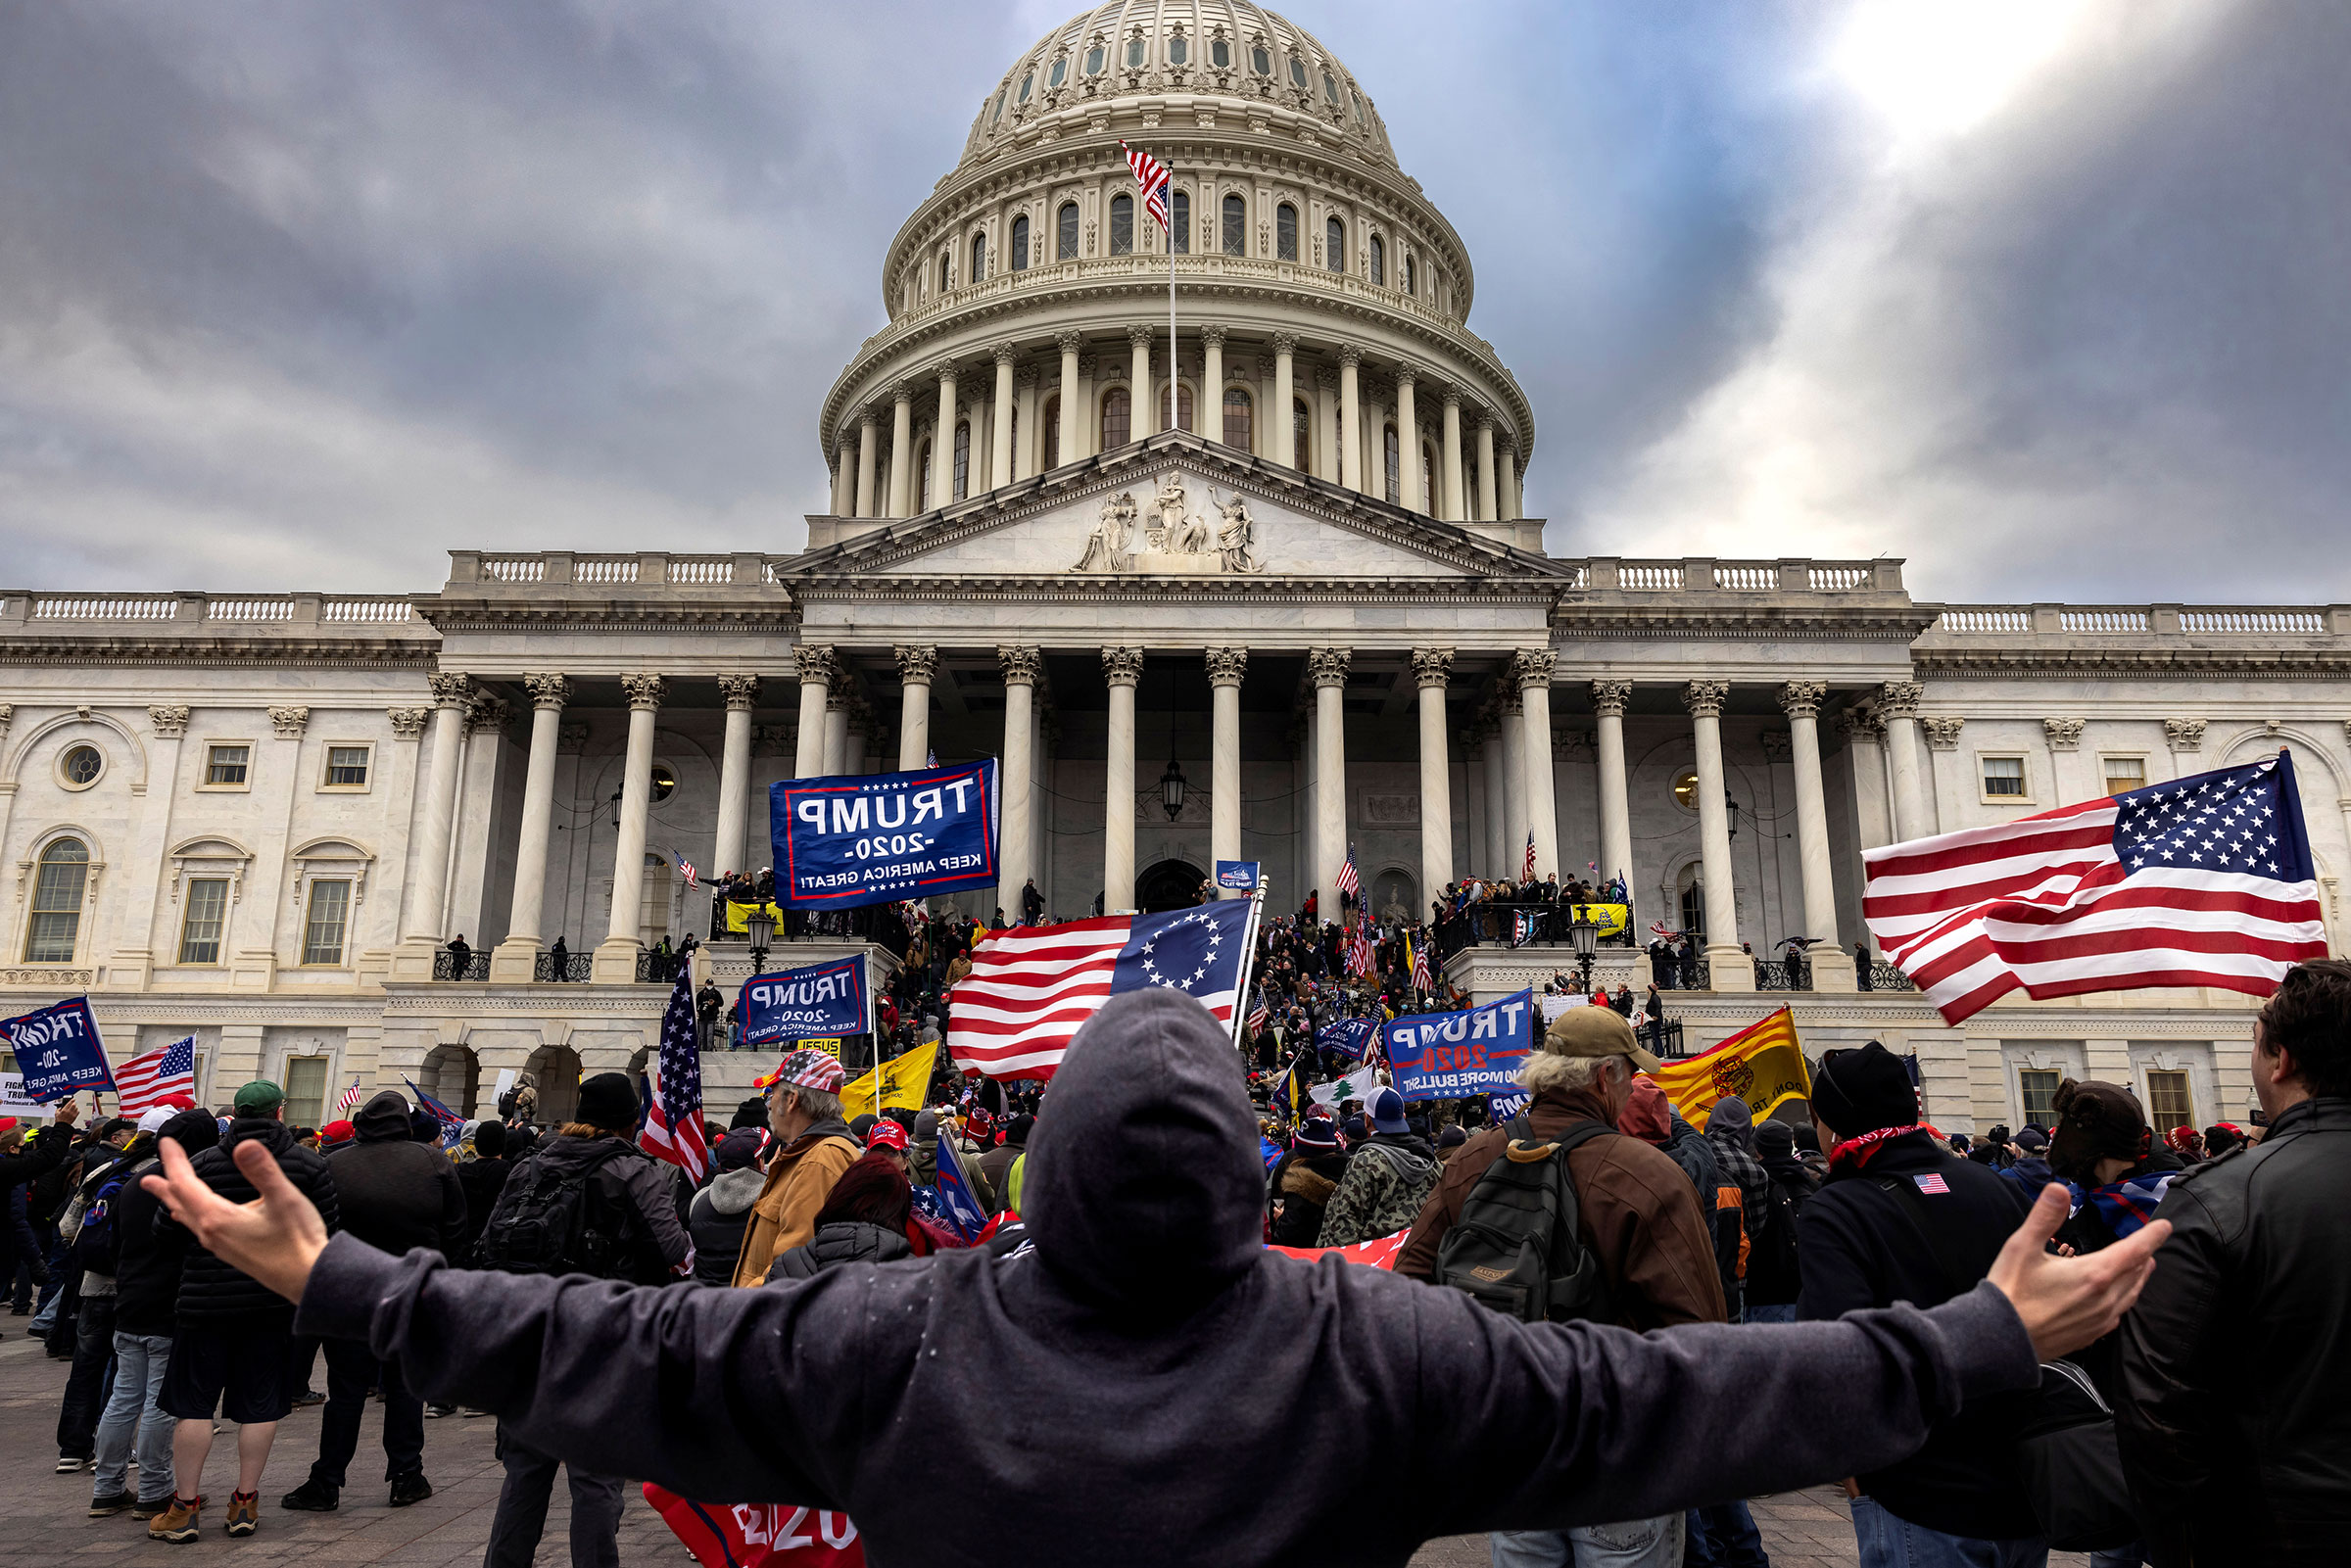 Trump supporters protest in front of the Capitol before a crowd stormed the building on Jan. 6, 2021. (Brent Stirton—Getty Images)